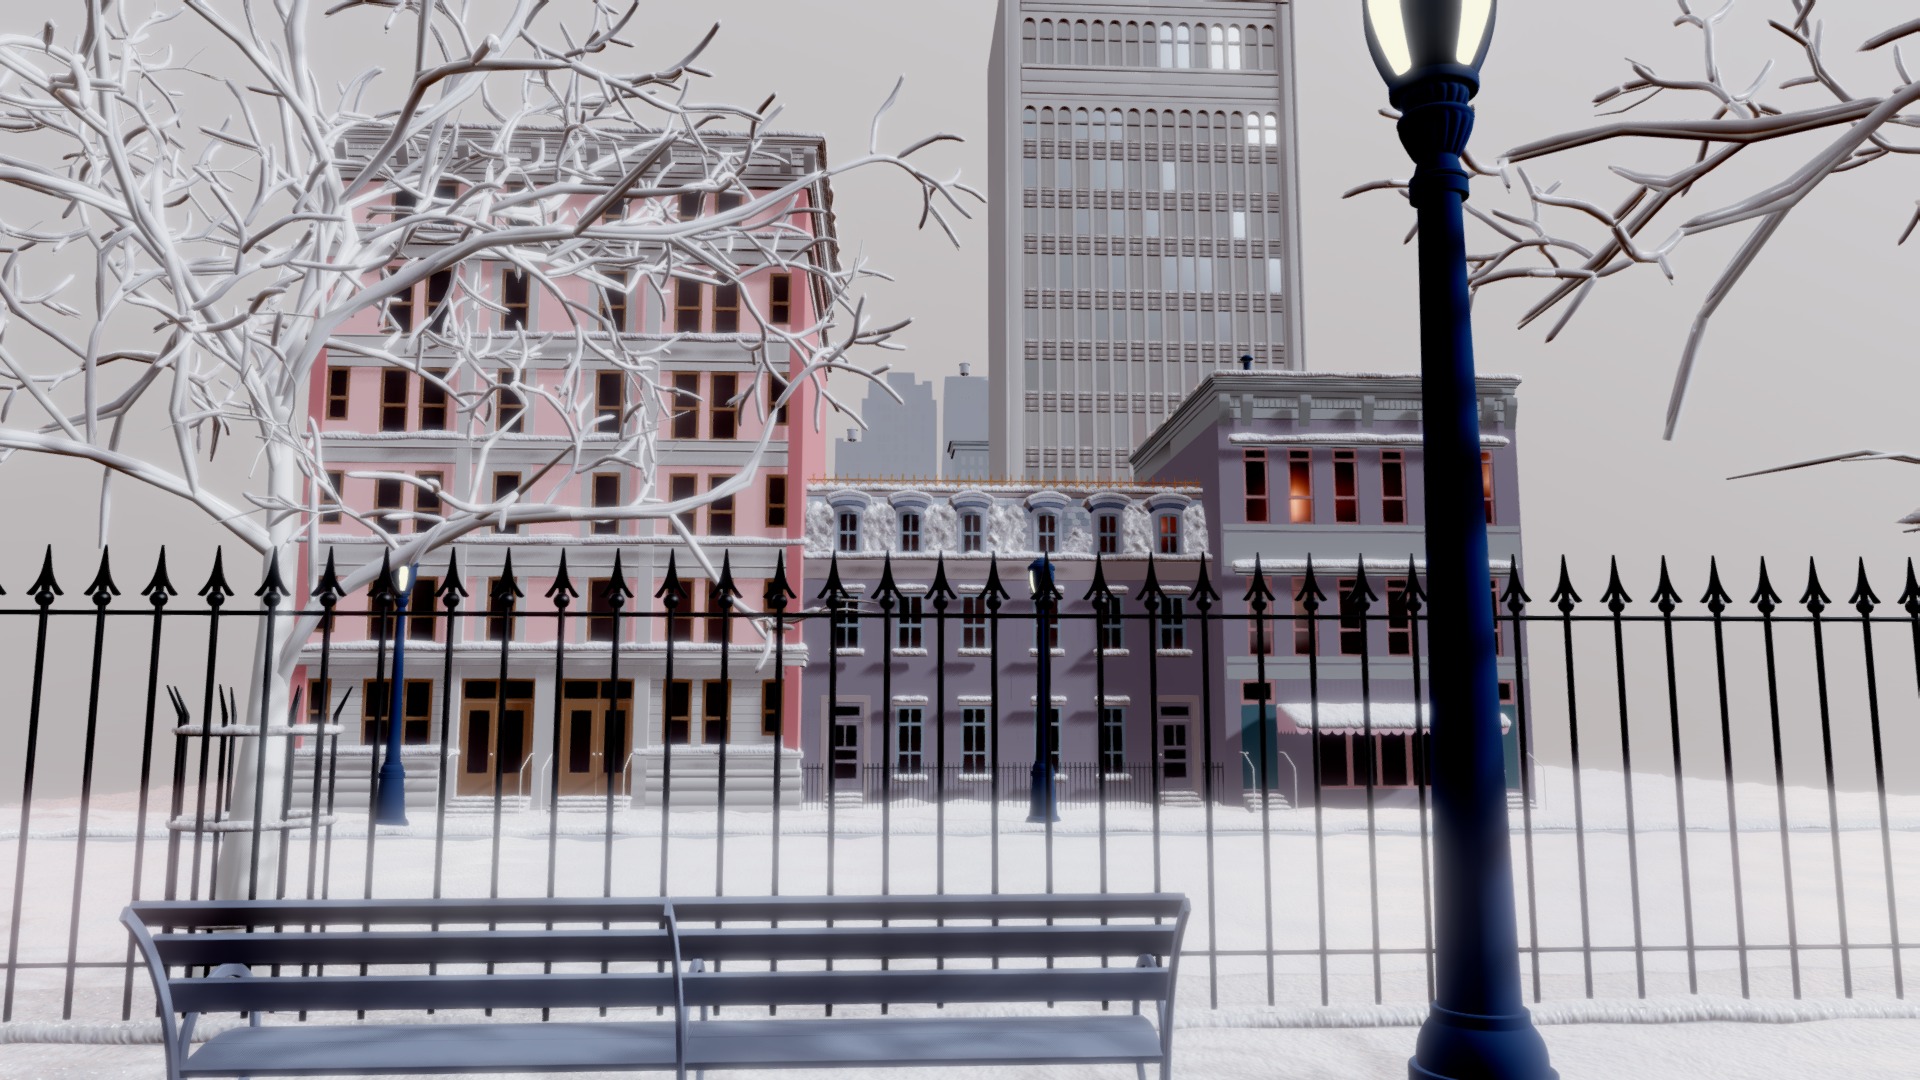 3D model 3D Street Day Snow - This is a 3D model of the 3D Street Day Snow. The 3D model is about a large building with a black fence.